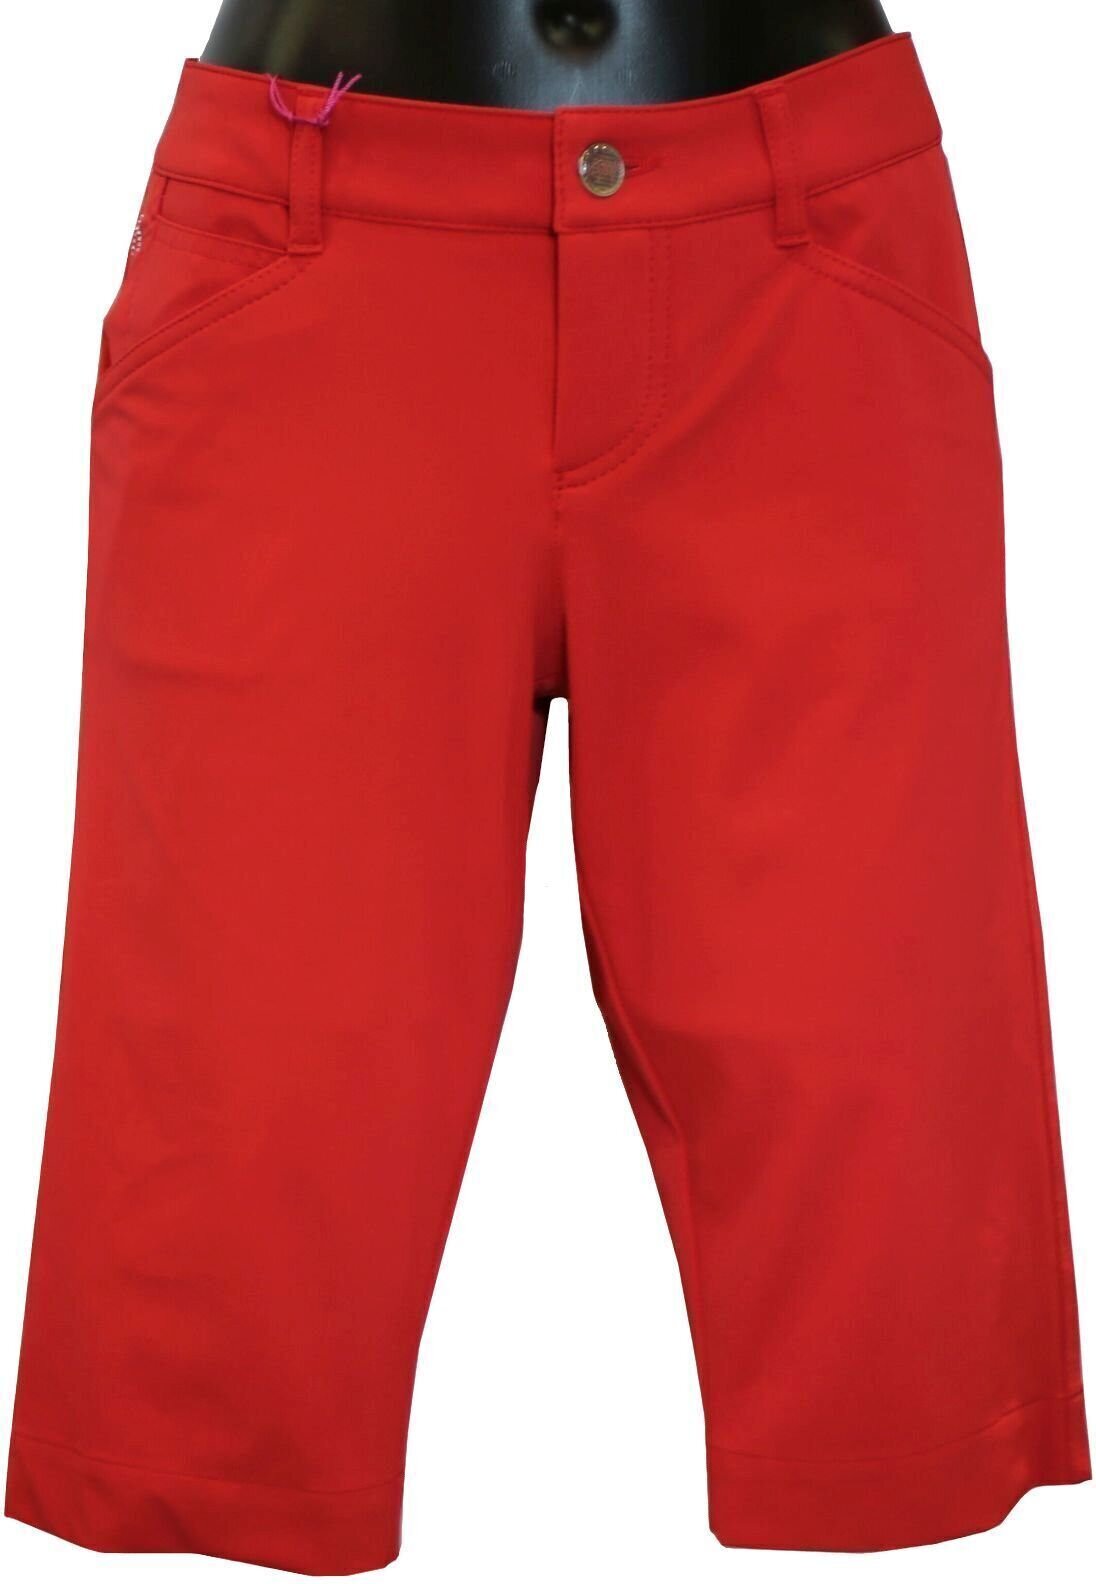 Trousers Alberto Mona-K - 3xDRY Cooler Red 38